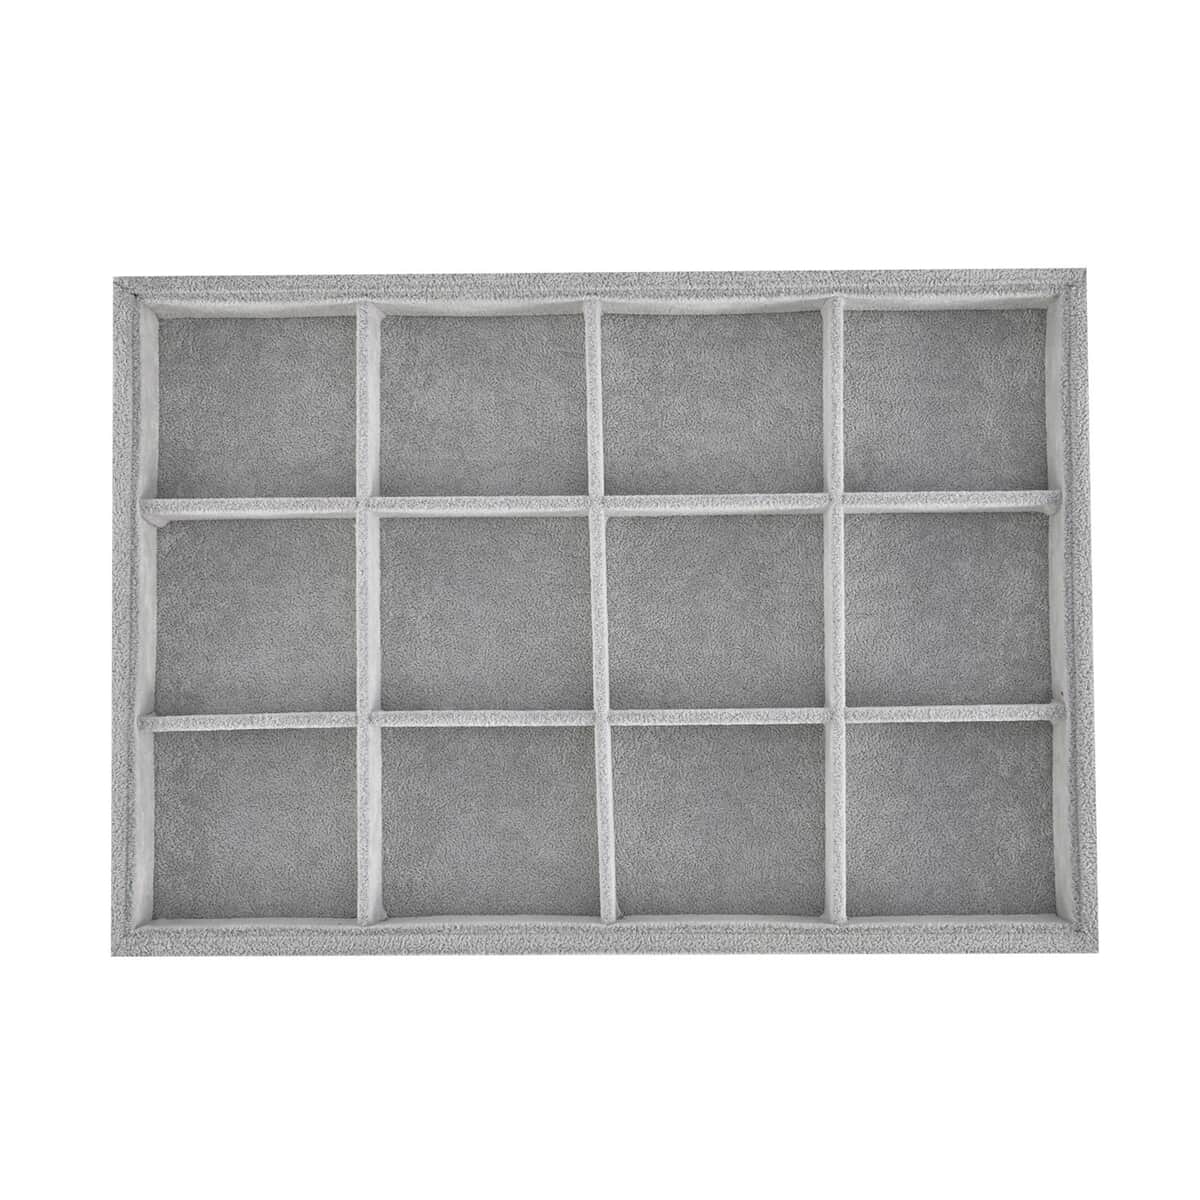 Gray Ice Velvet Removeable 12 Section Jewelry Tray (13.8"x9.4"x1.2") image number 0